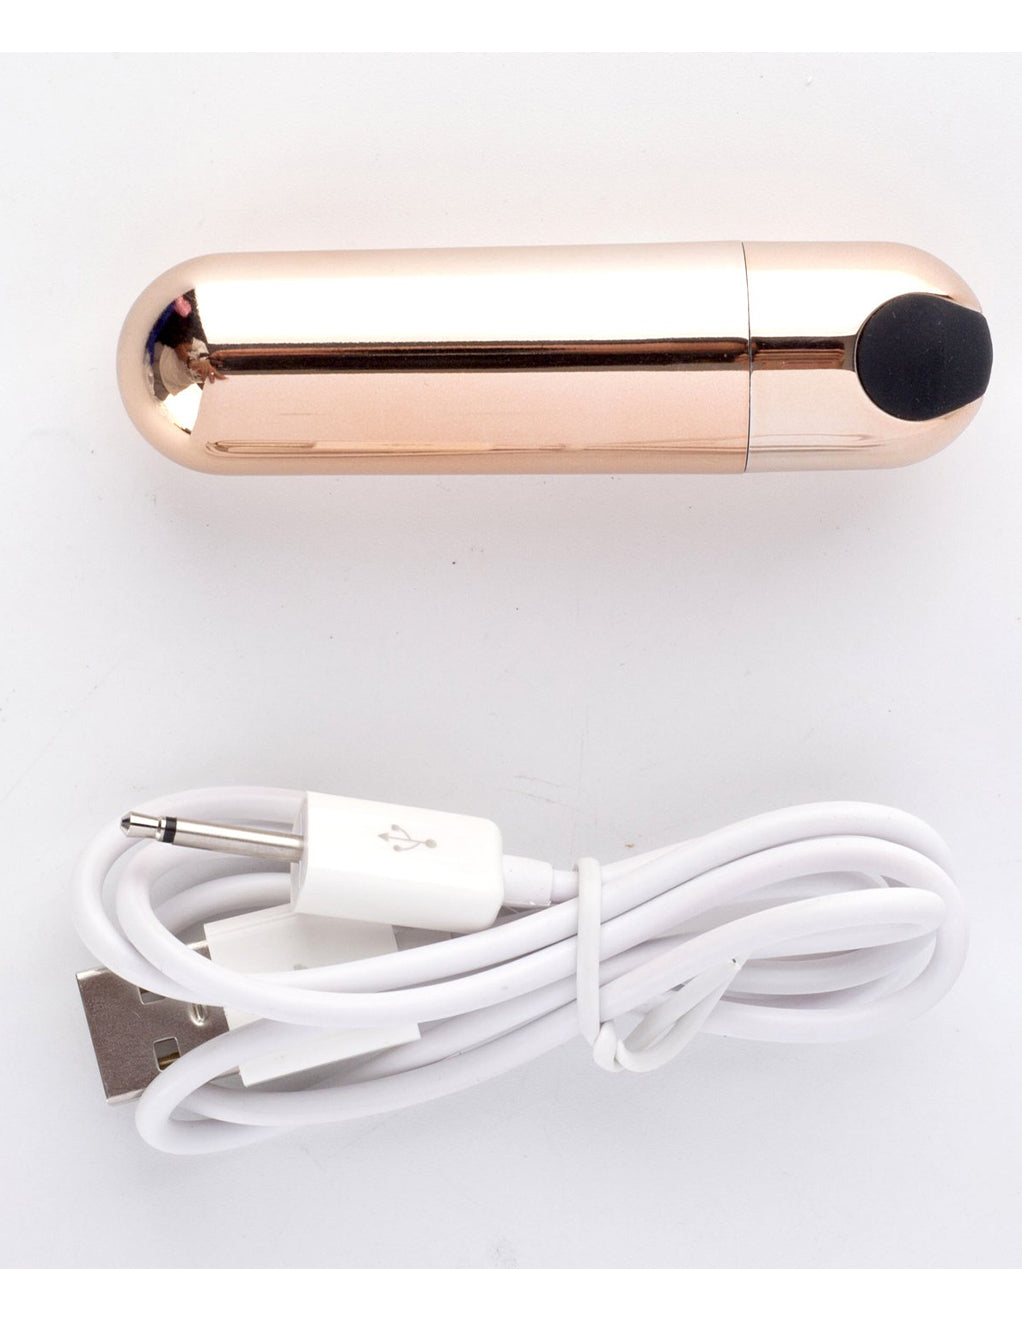 Maia Jessi Super Charged Mini Bullet- Rose Gold- Charger